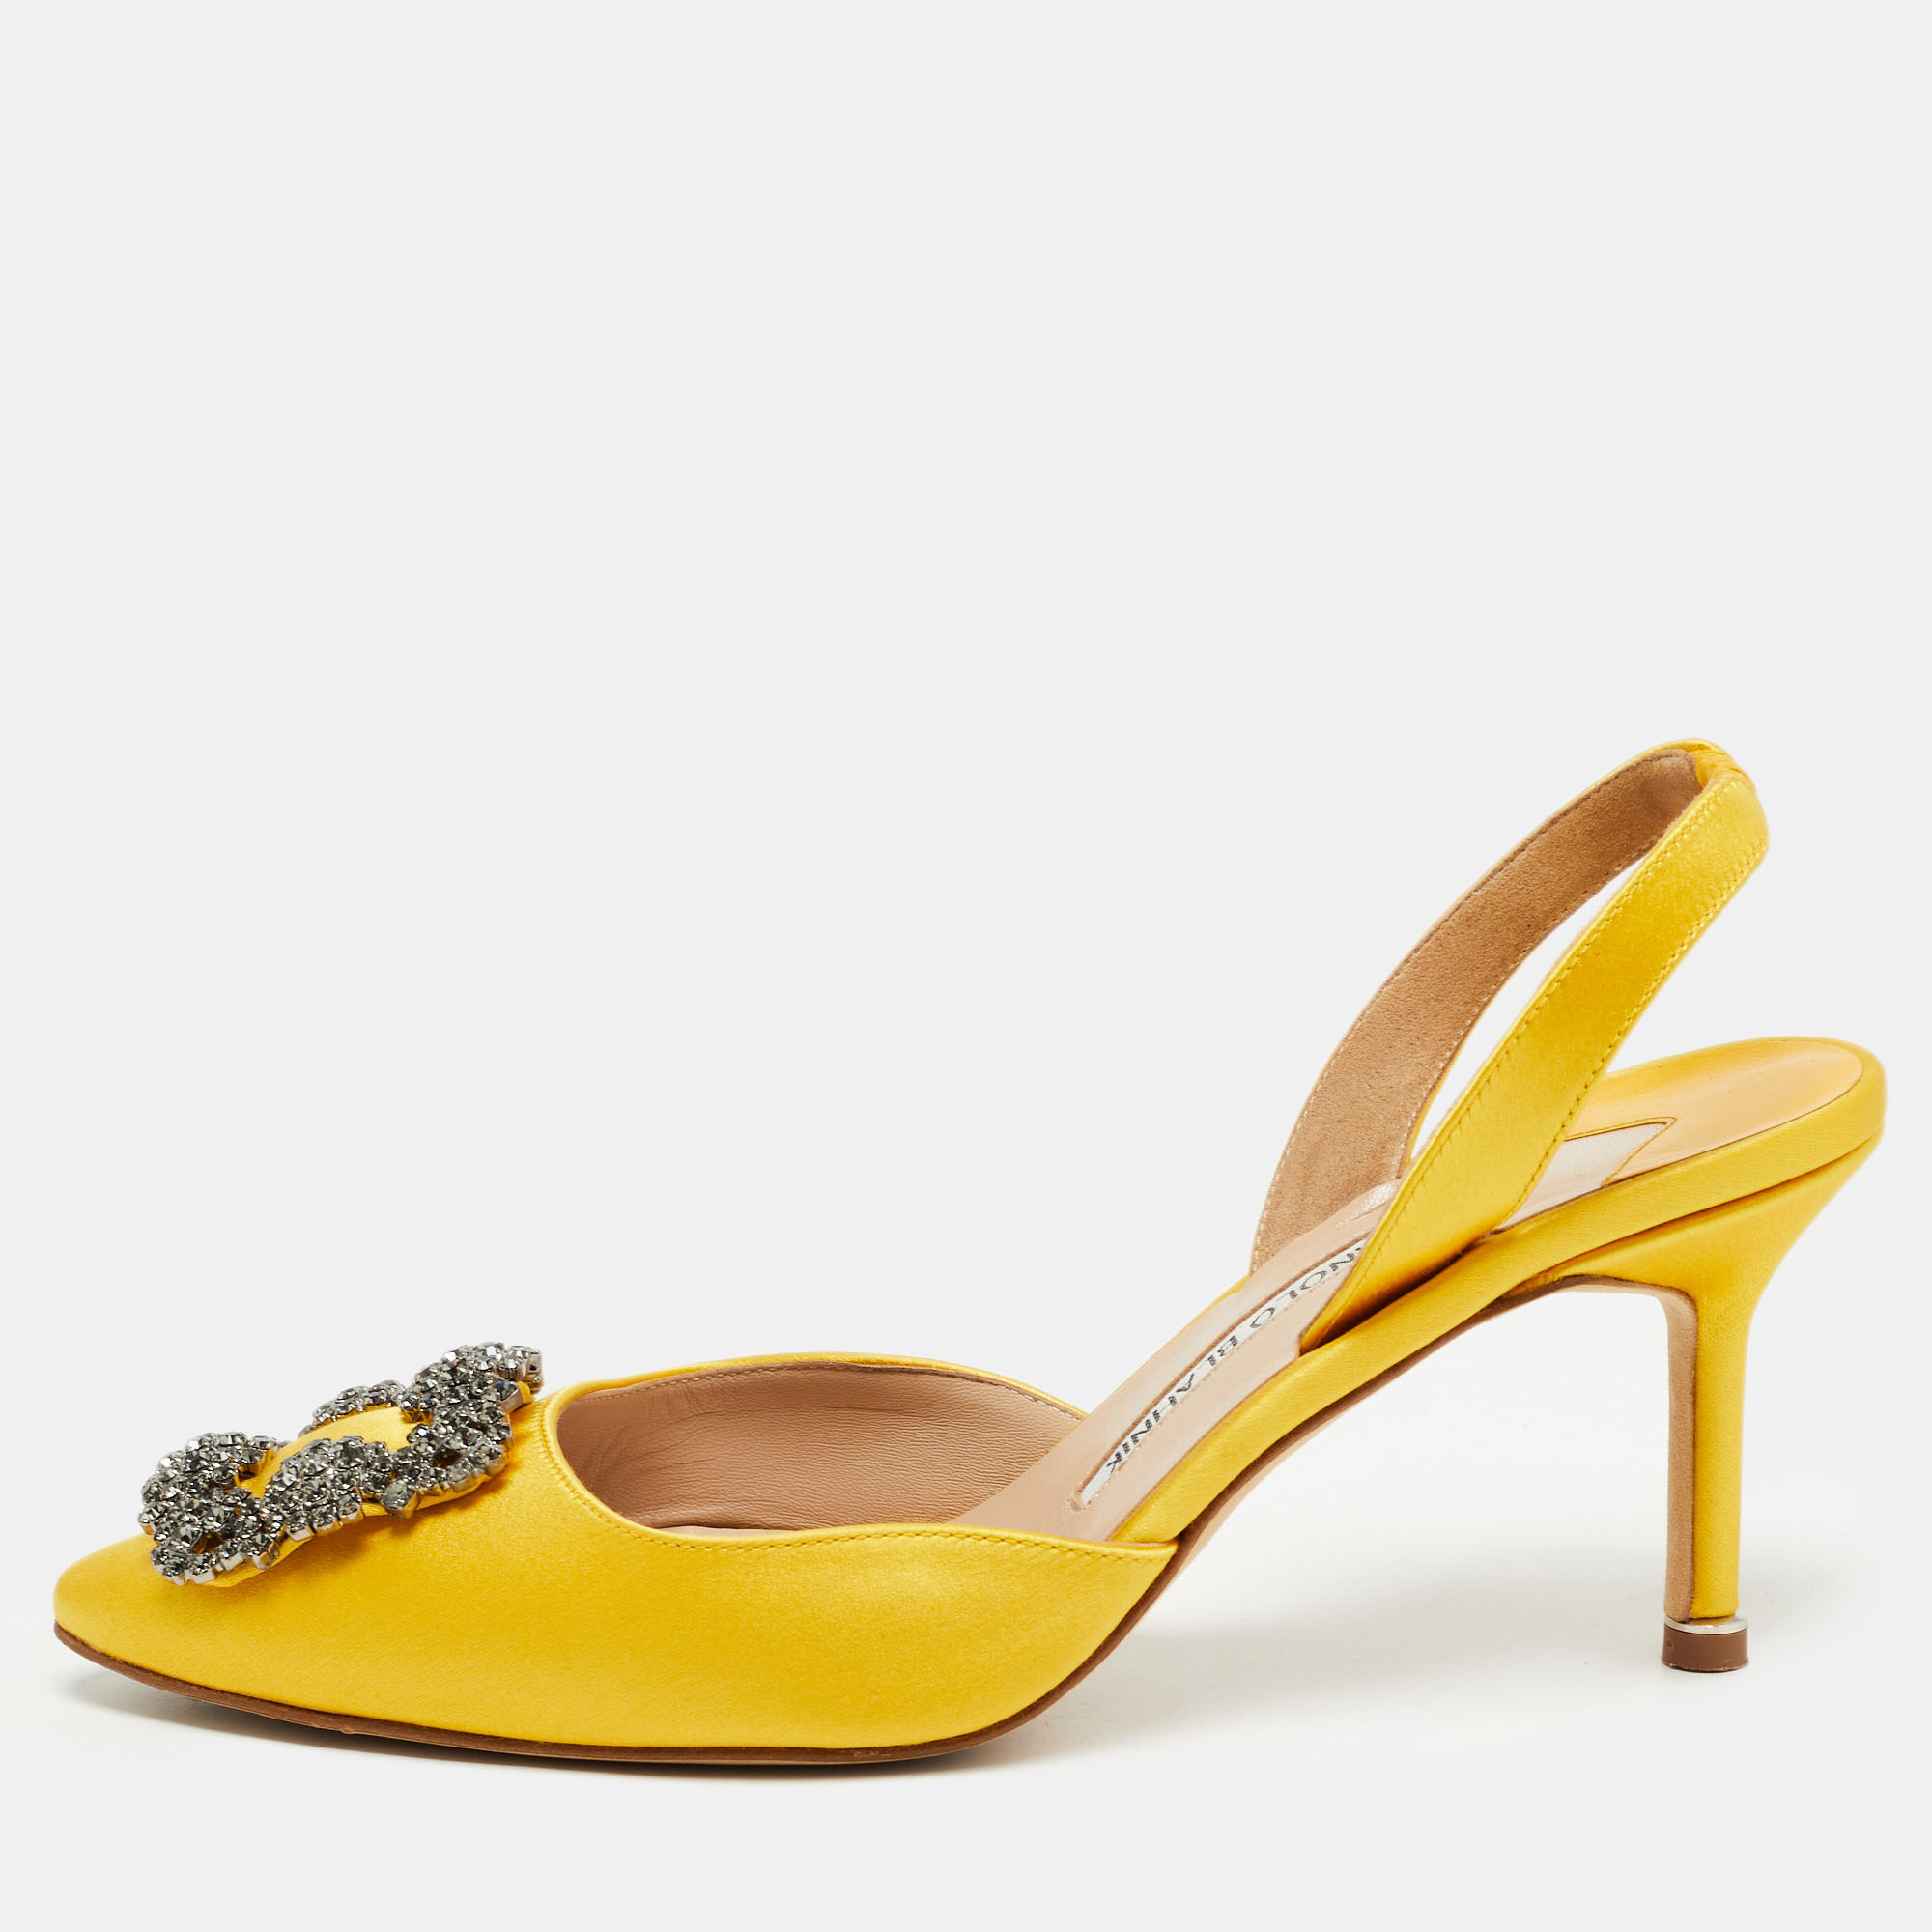 Pre-owned Manolo Blahnik Yellow Satin Hangisi Slingback Pumps Size 37.5